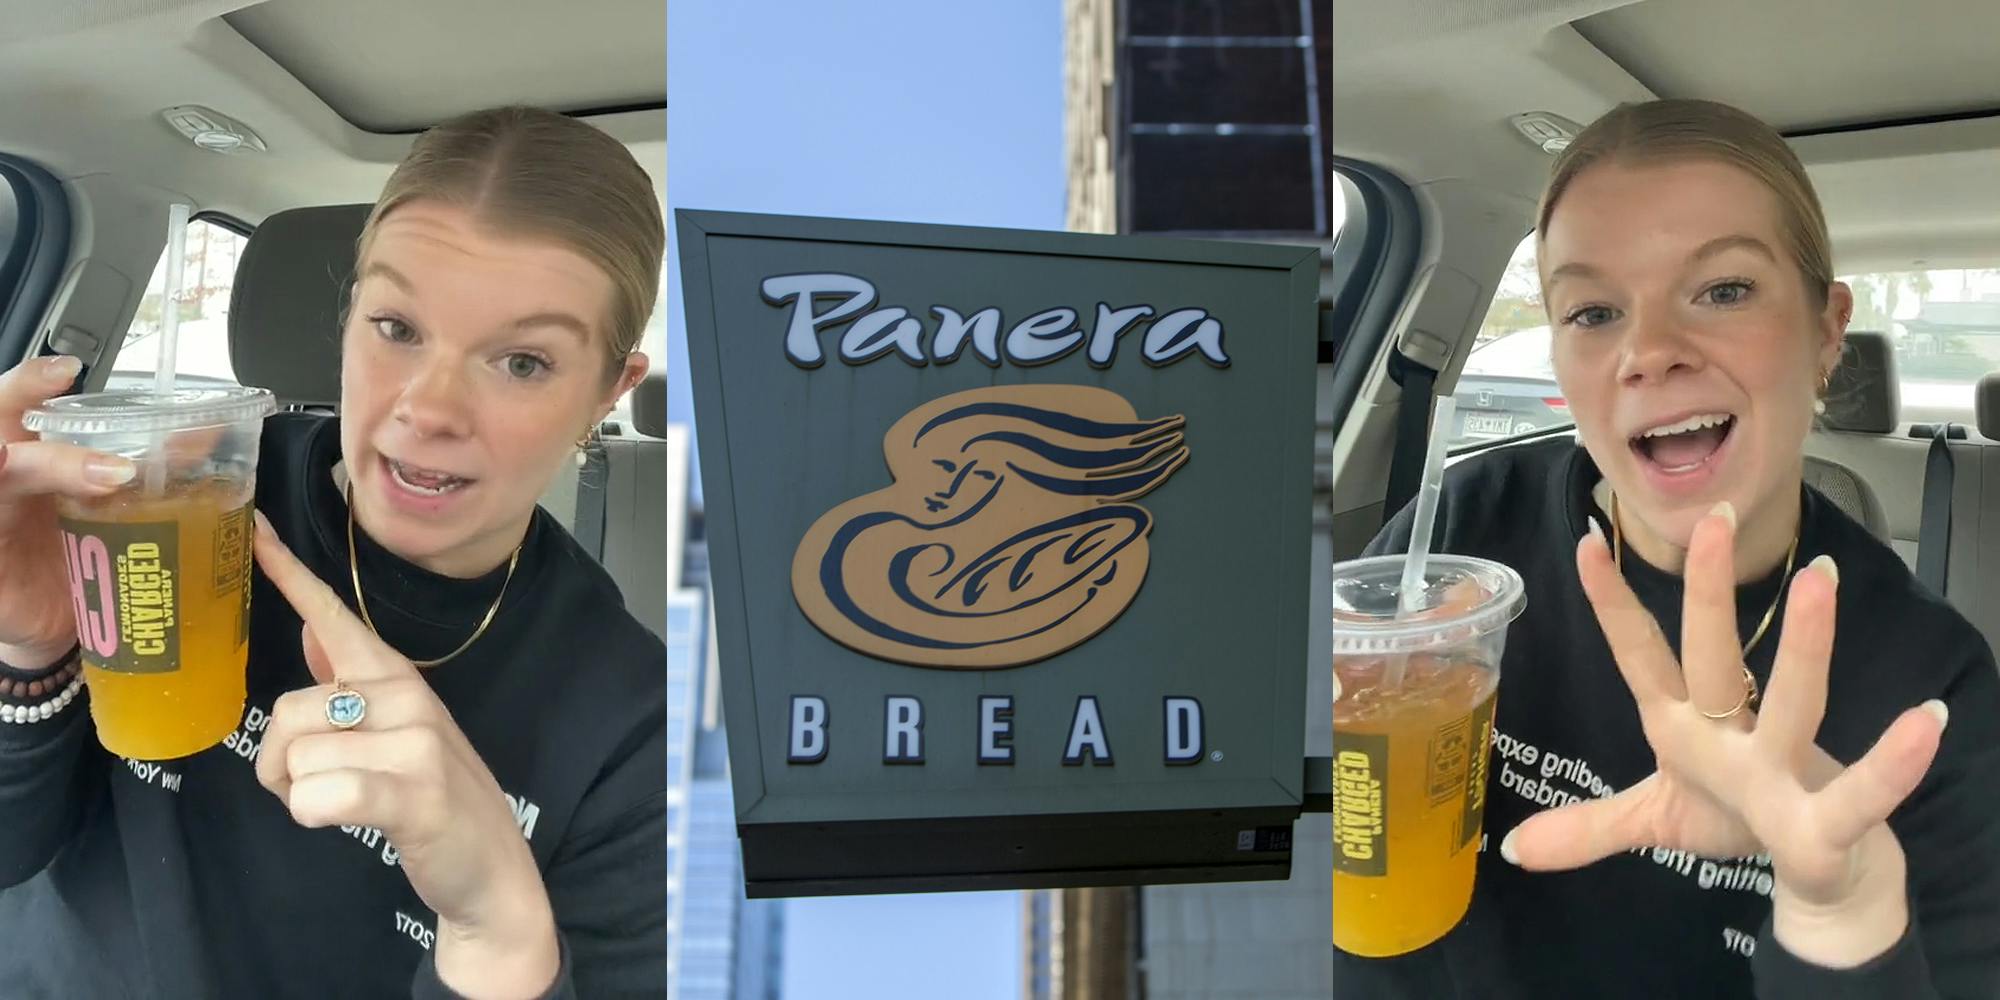 woman speaking in car holding Panera Super Charged Lemonade pointing to it (l) Panera Bread sign (c) woman speaking in car with hand out while holding Panera's Super Charged Lemonade (r)